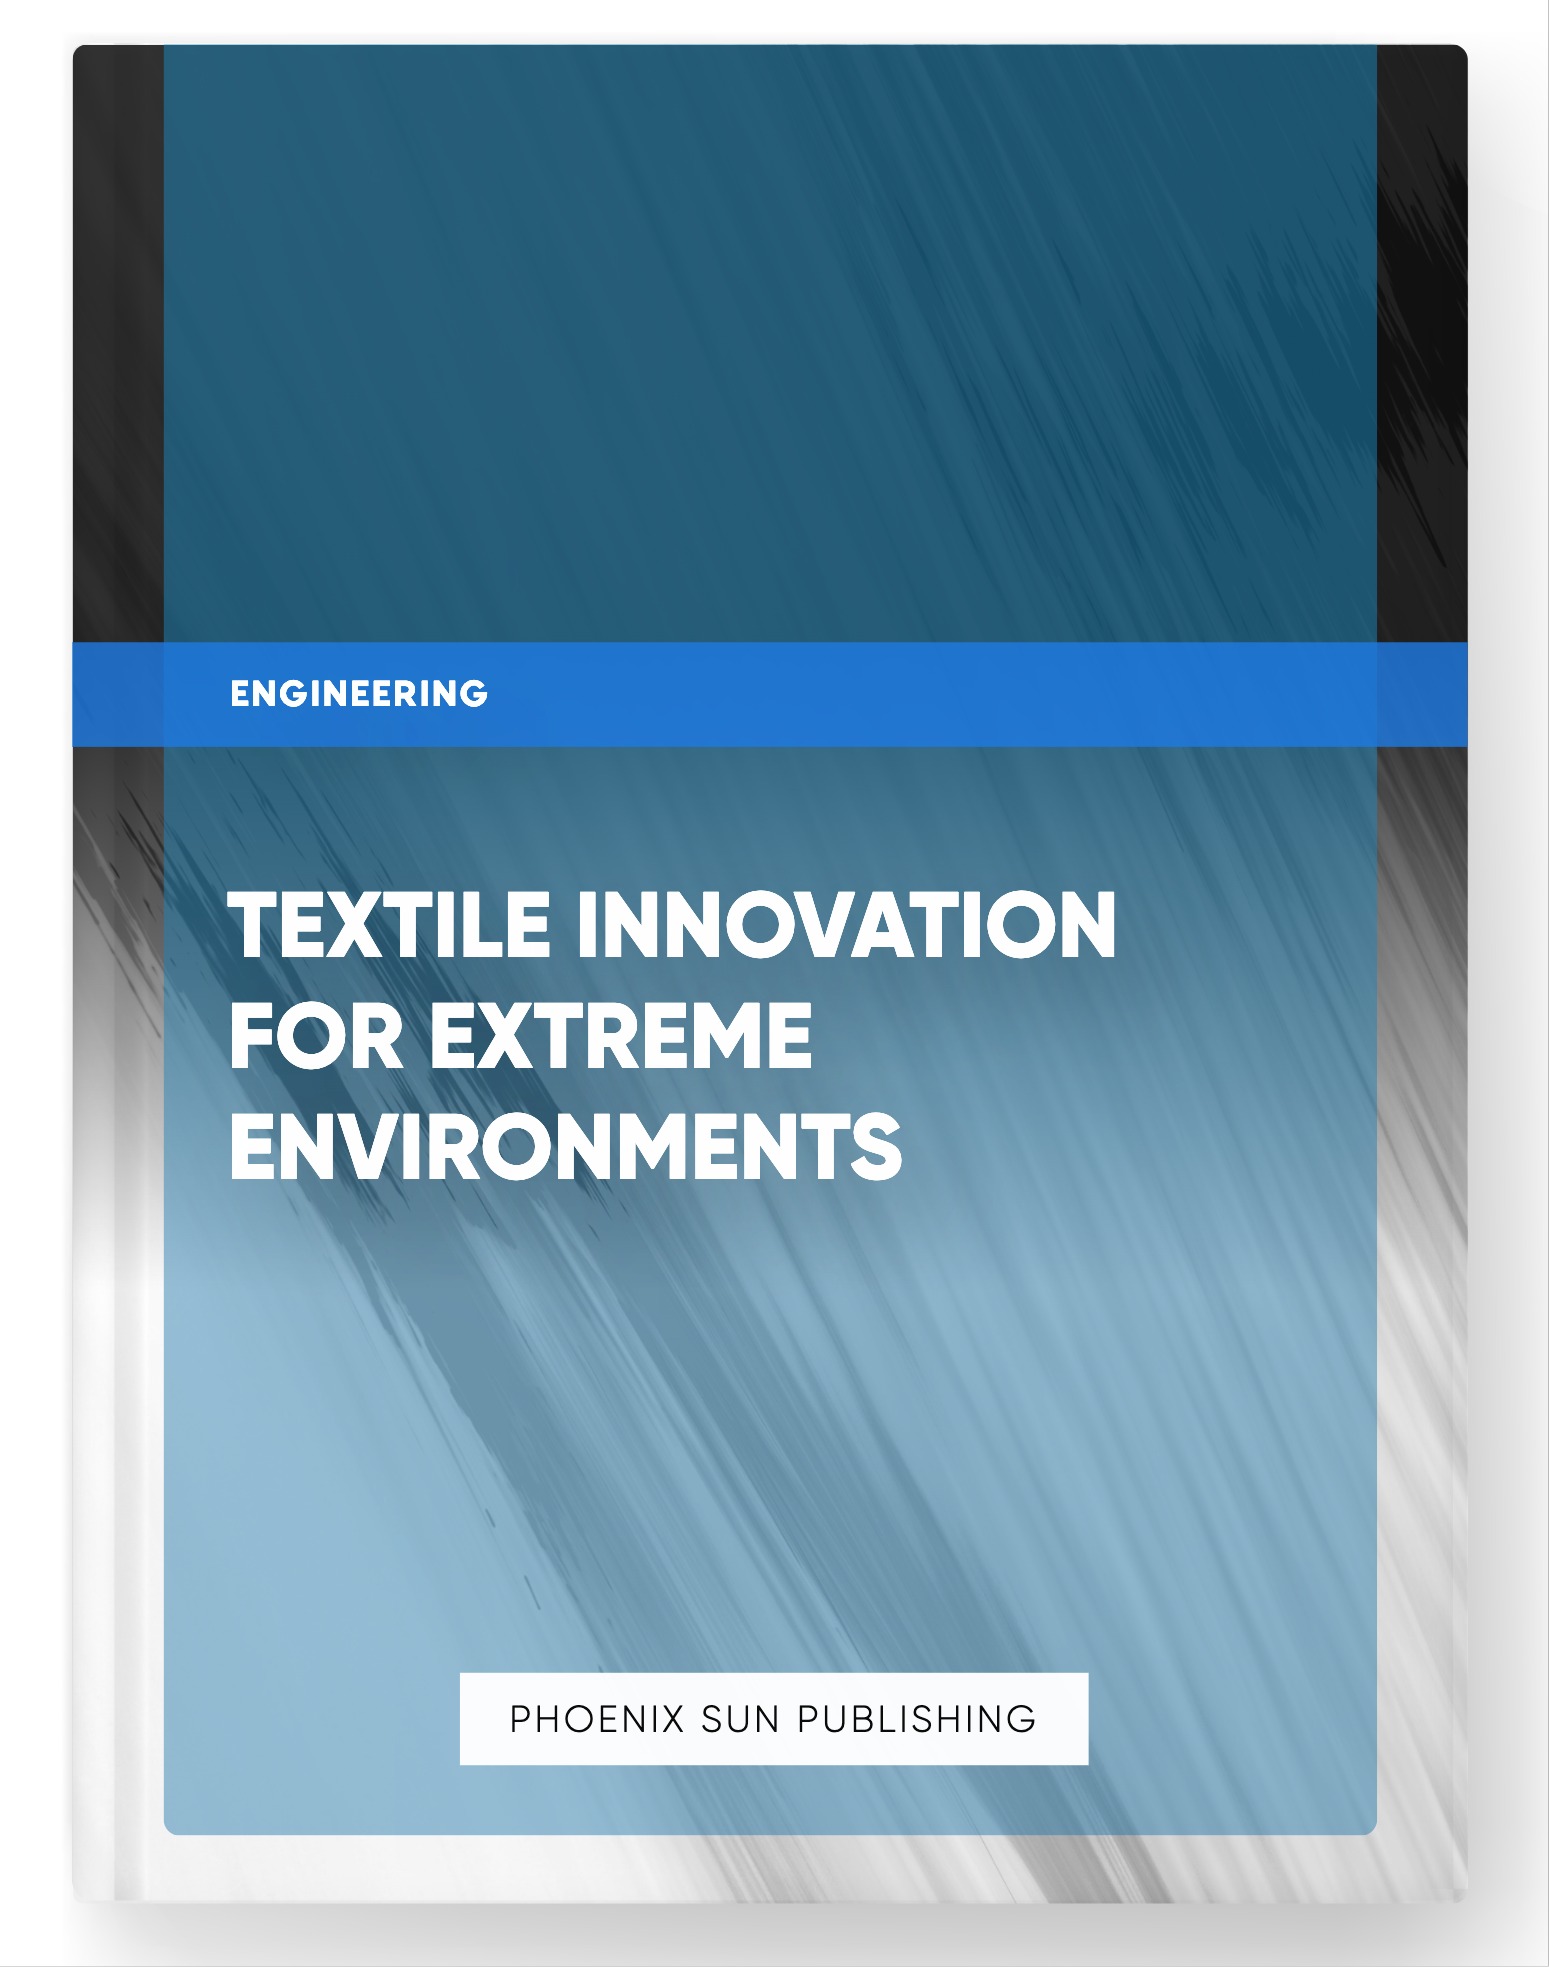 Textile Innovation for Extreme Environments